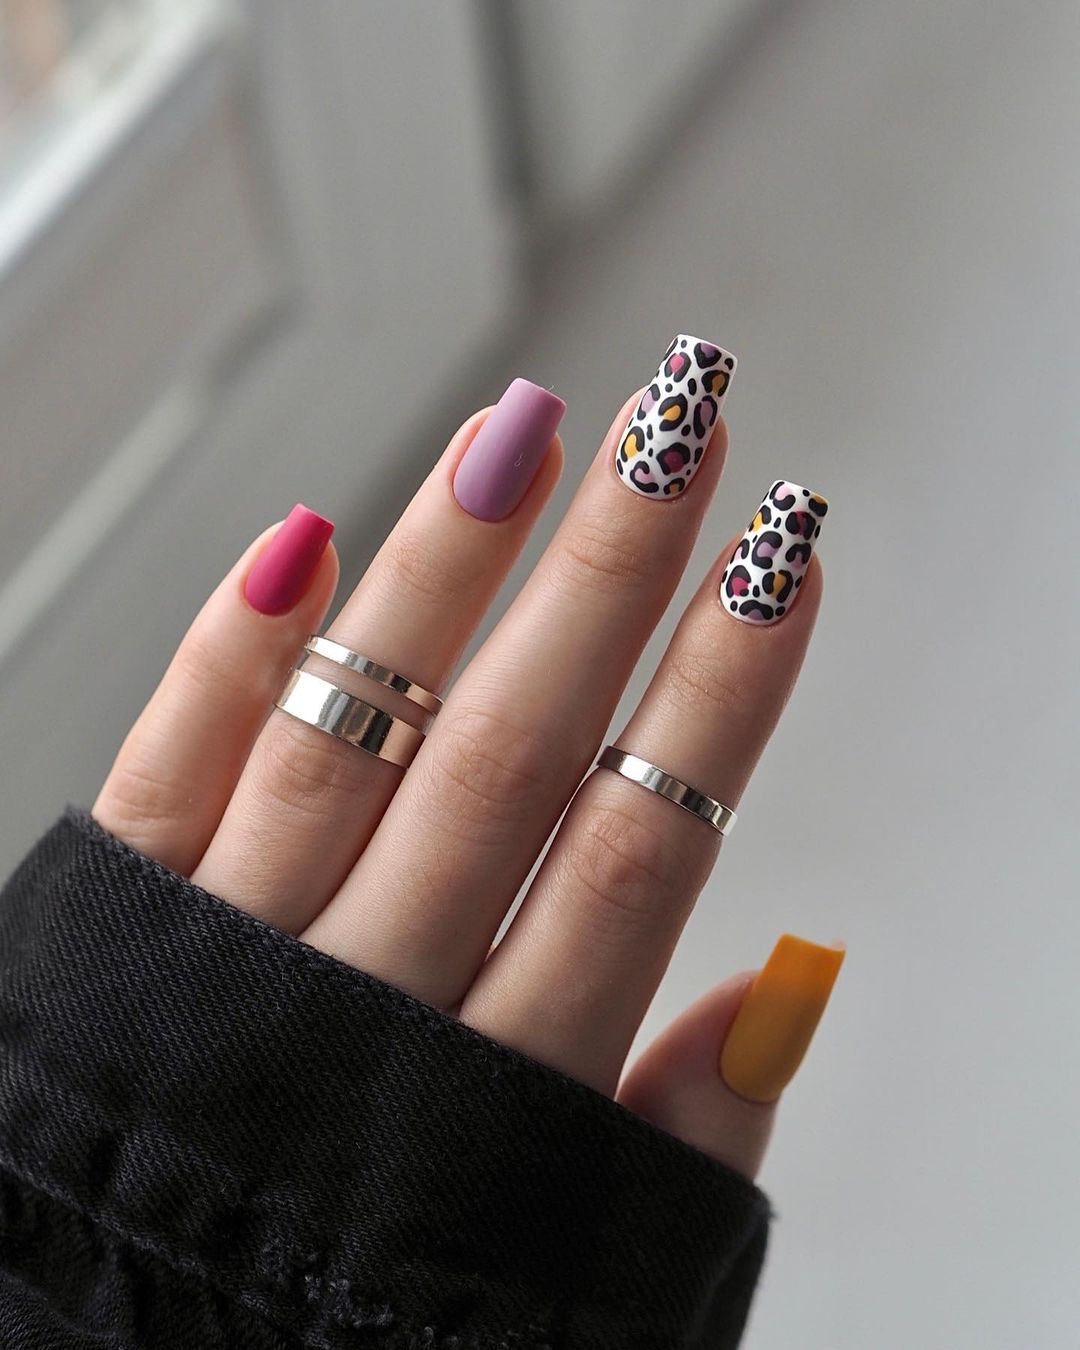 30 Best Animal Print Nails to Inspire You